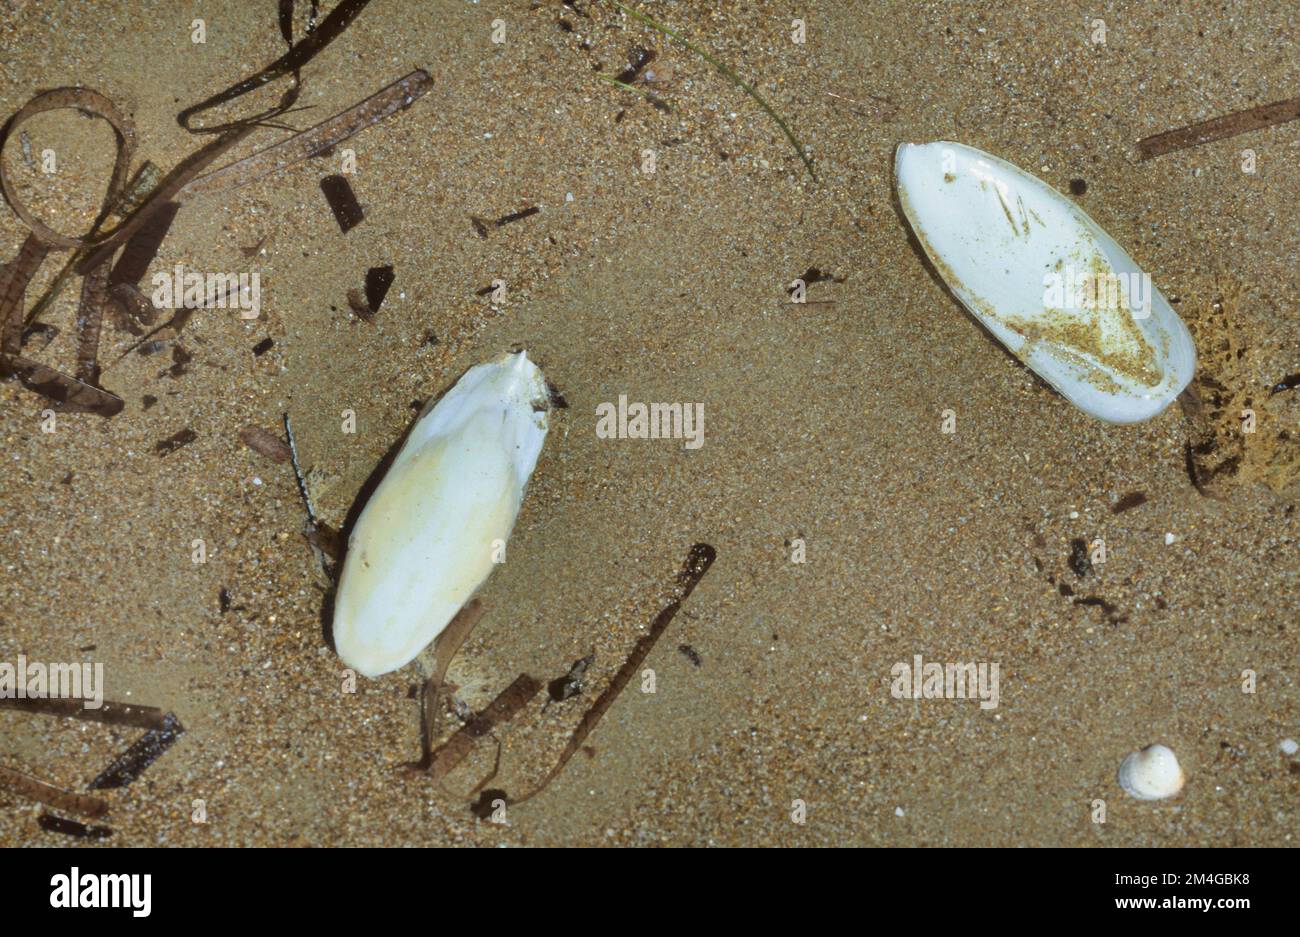 common cuttlefish (Sepia officinalis), cuttlebones washed up on the beach Stock Photo